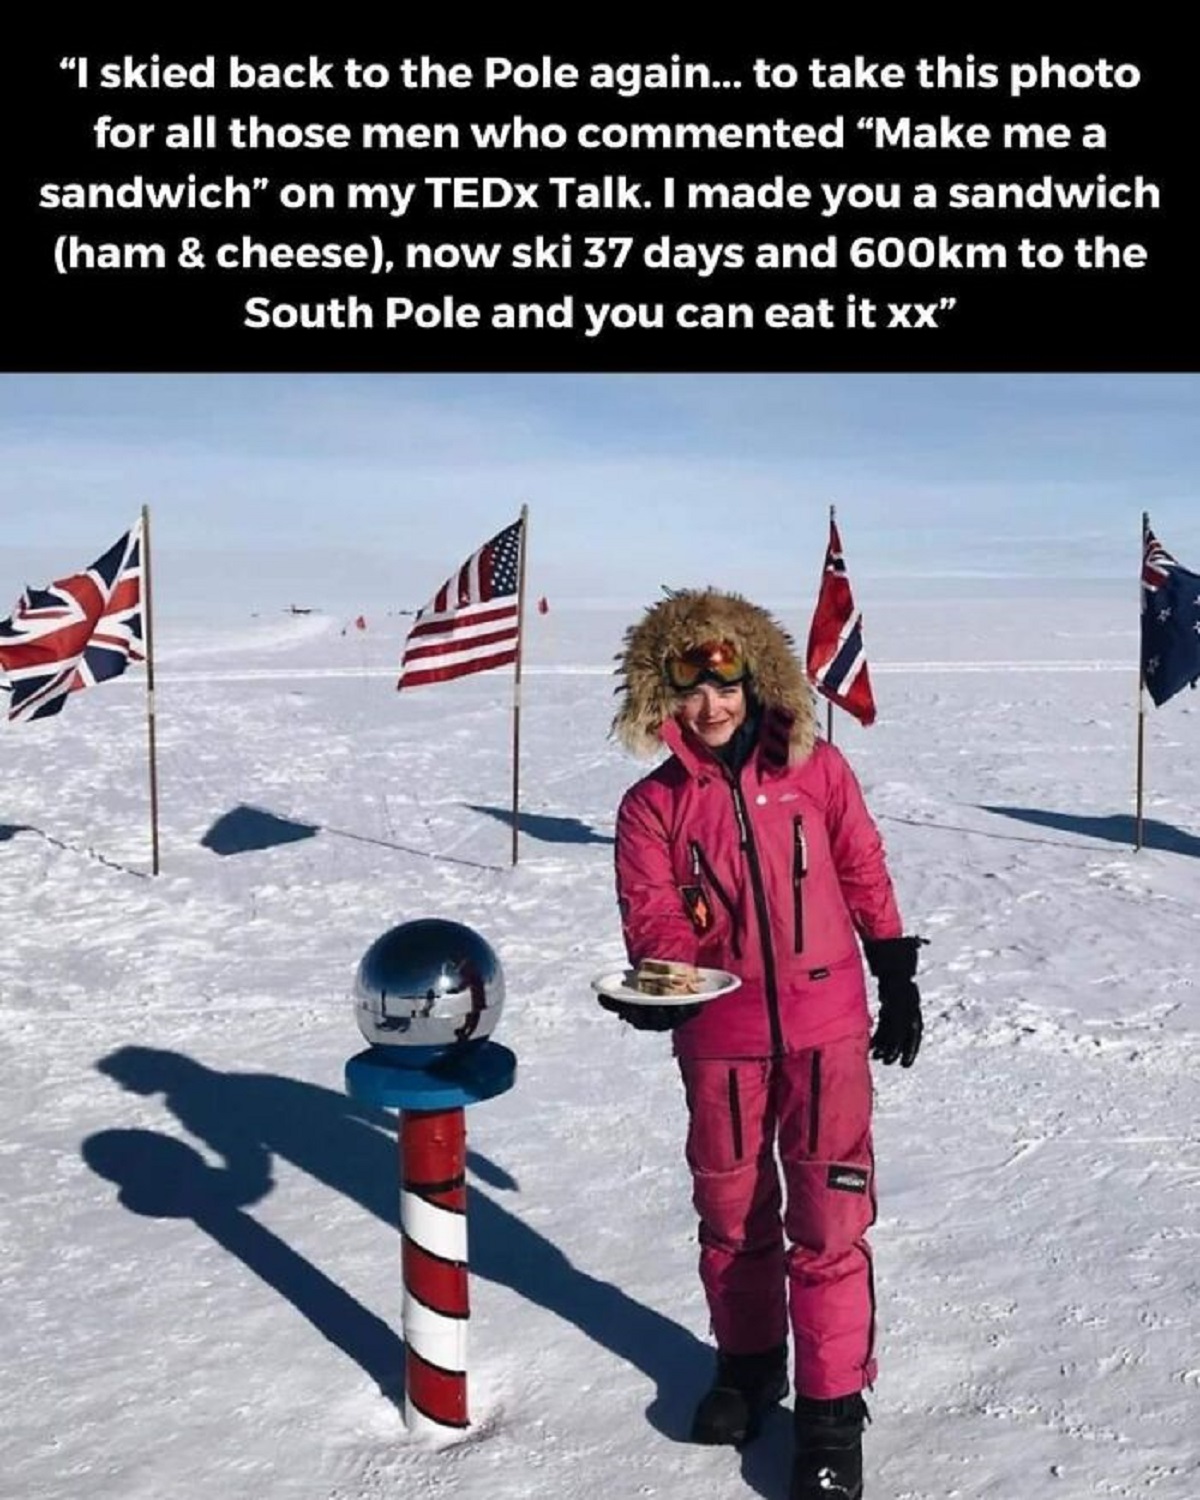 jade hameister sandwich - "I skied back to the Pole again... to take this photo for all those men who commented "Make me a sandwich" on my TEDx Talk. I made you a sandwich ham & cheese, now ski 37 days and m to the South Pole and you can eat it xx"